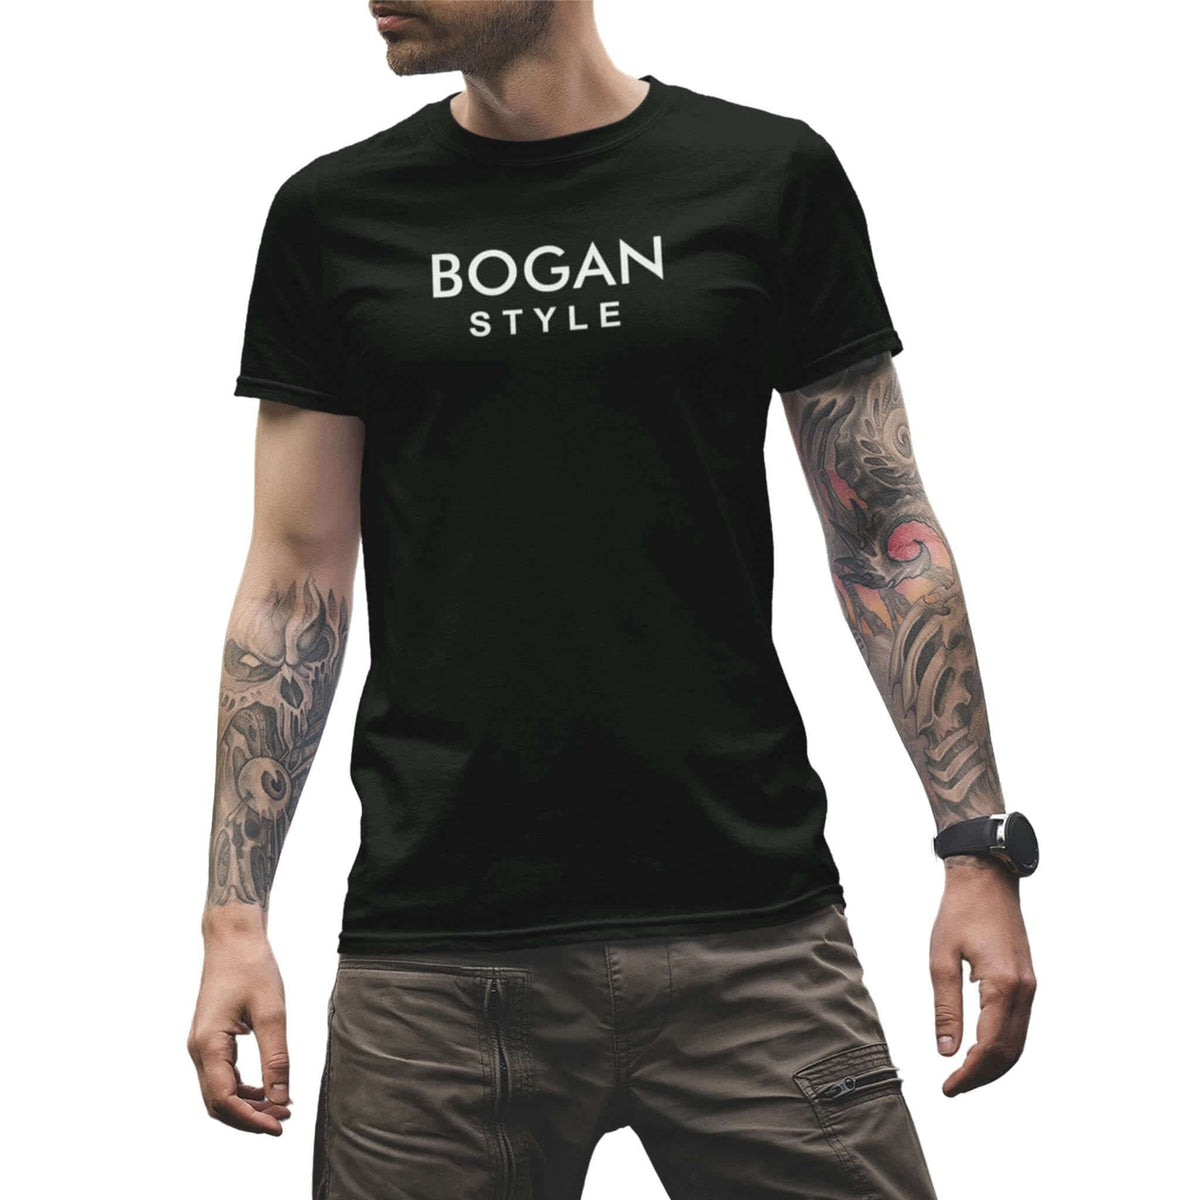 Guy with tattoos wearing black tee with Bogan Style printed on the front 